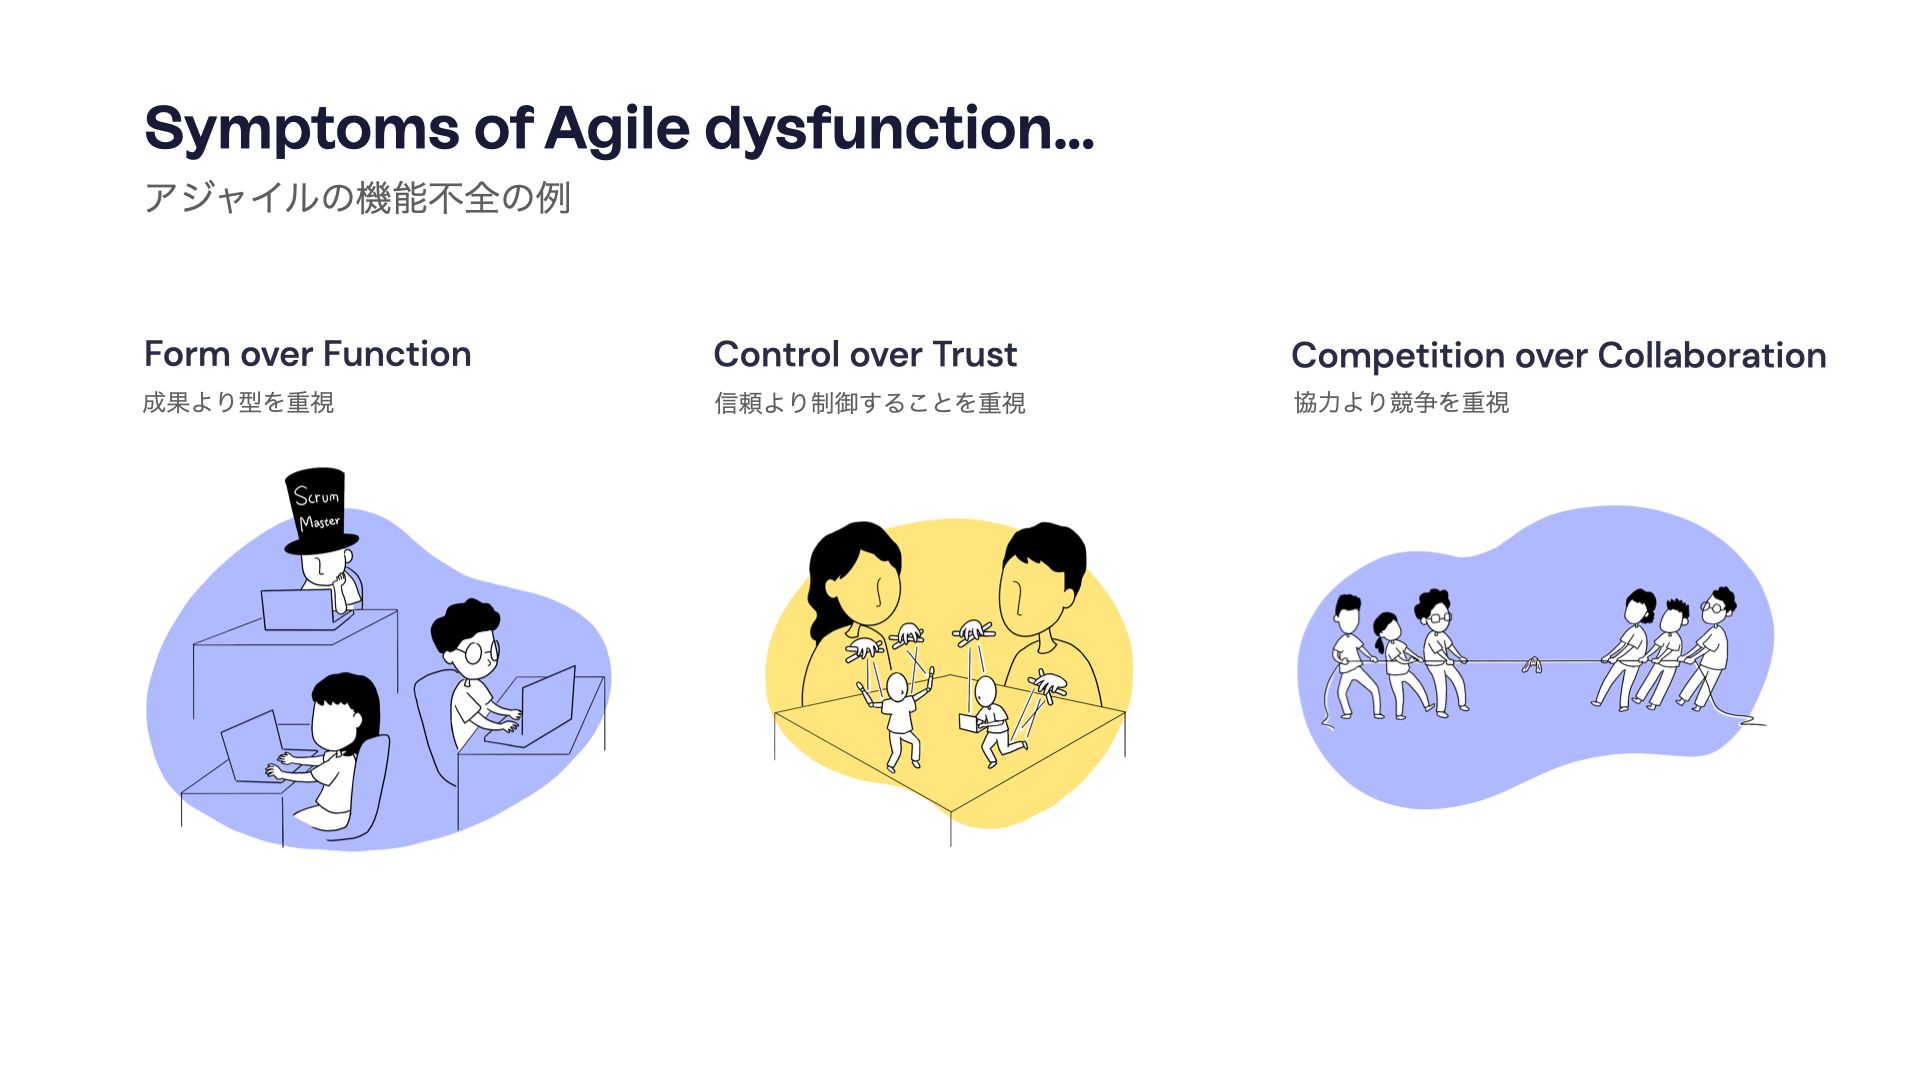 Building a coaching culture: From doing Agile to being Agile